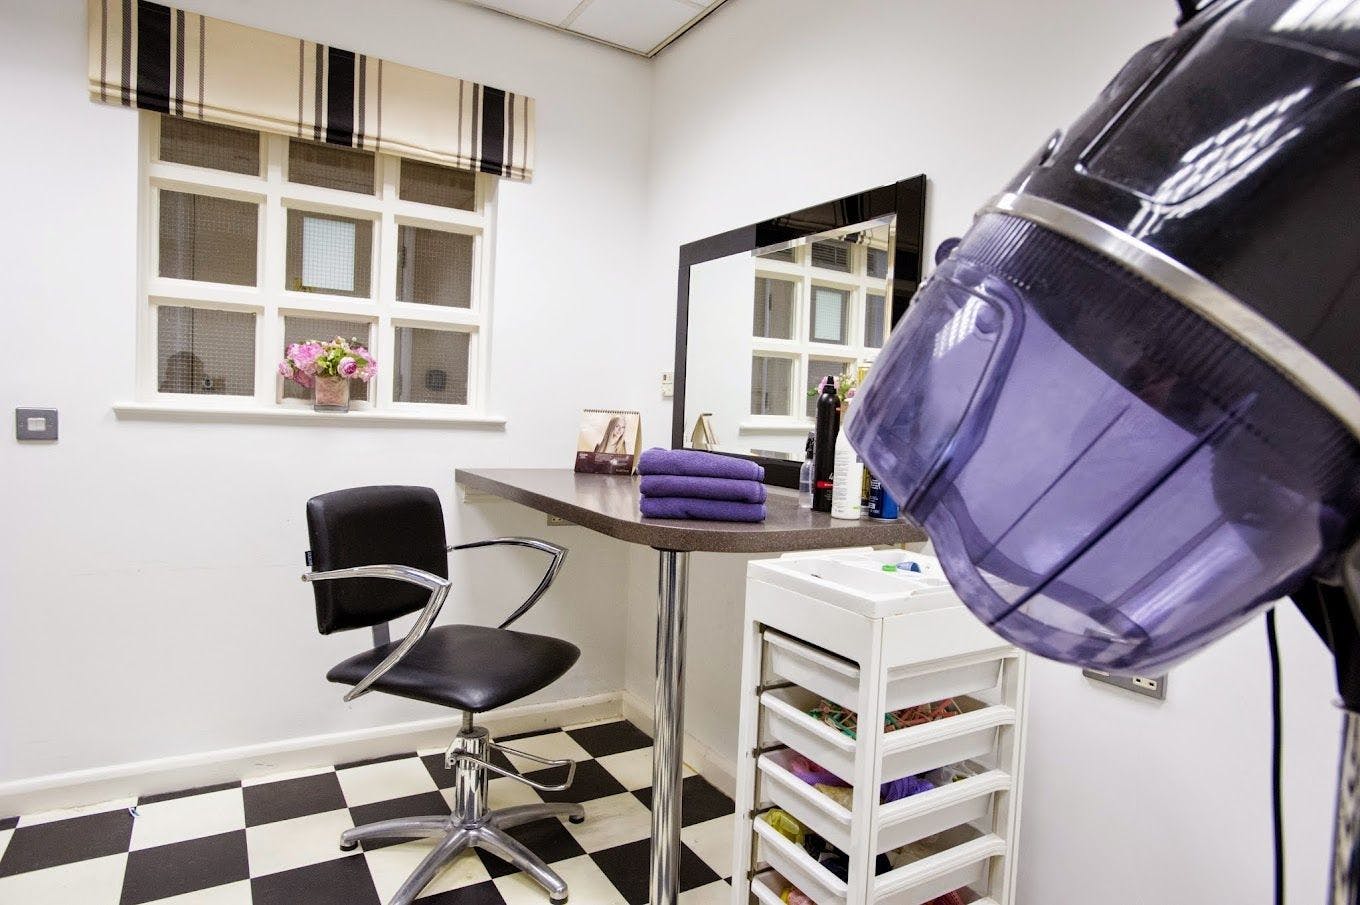 Salon at Chadwell House Care Home in Romford, Havering